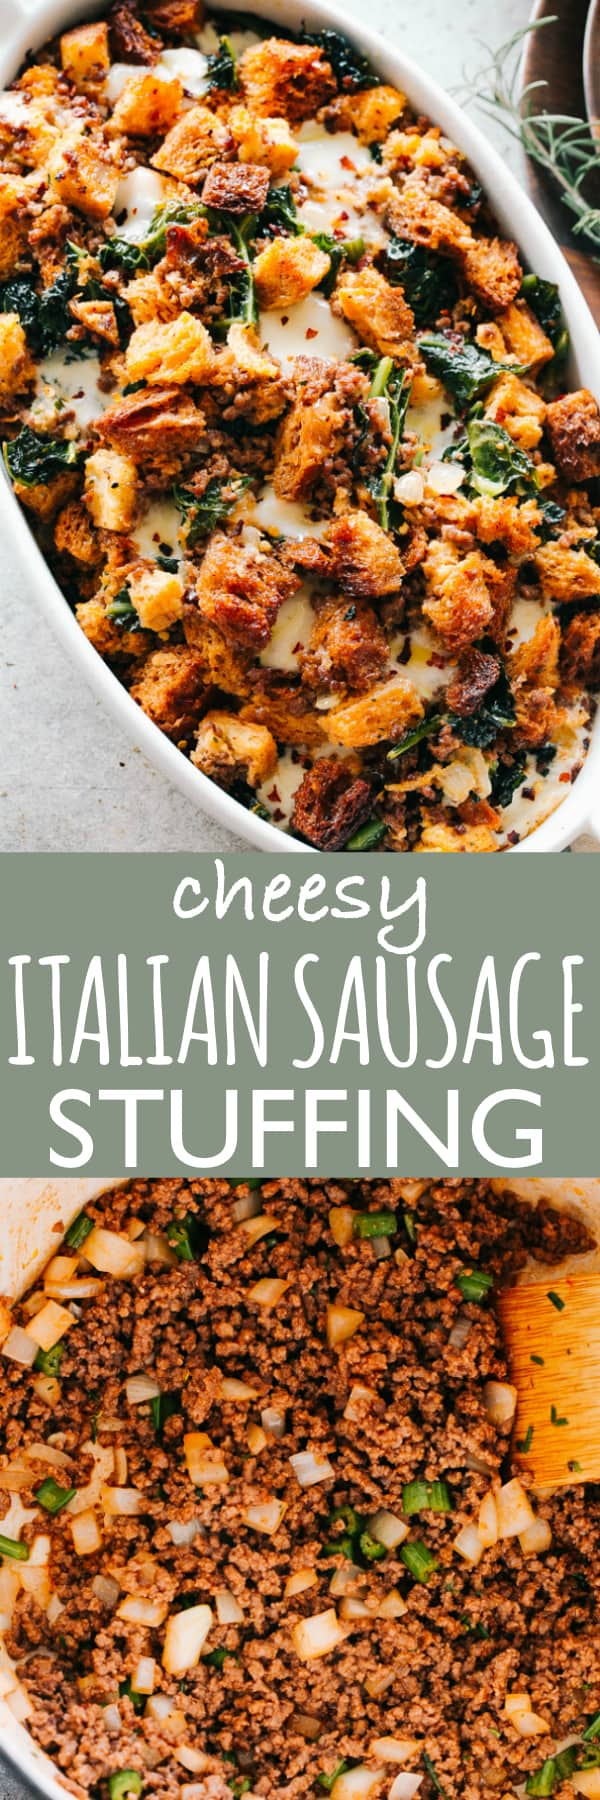 Cheesy Italian Sausage Stuffing Recipe | Delicious Thanksgiving Side Dish